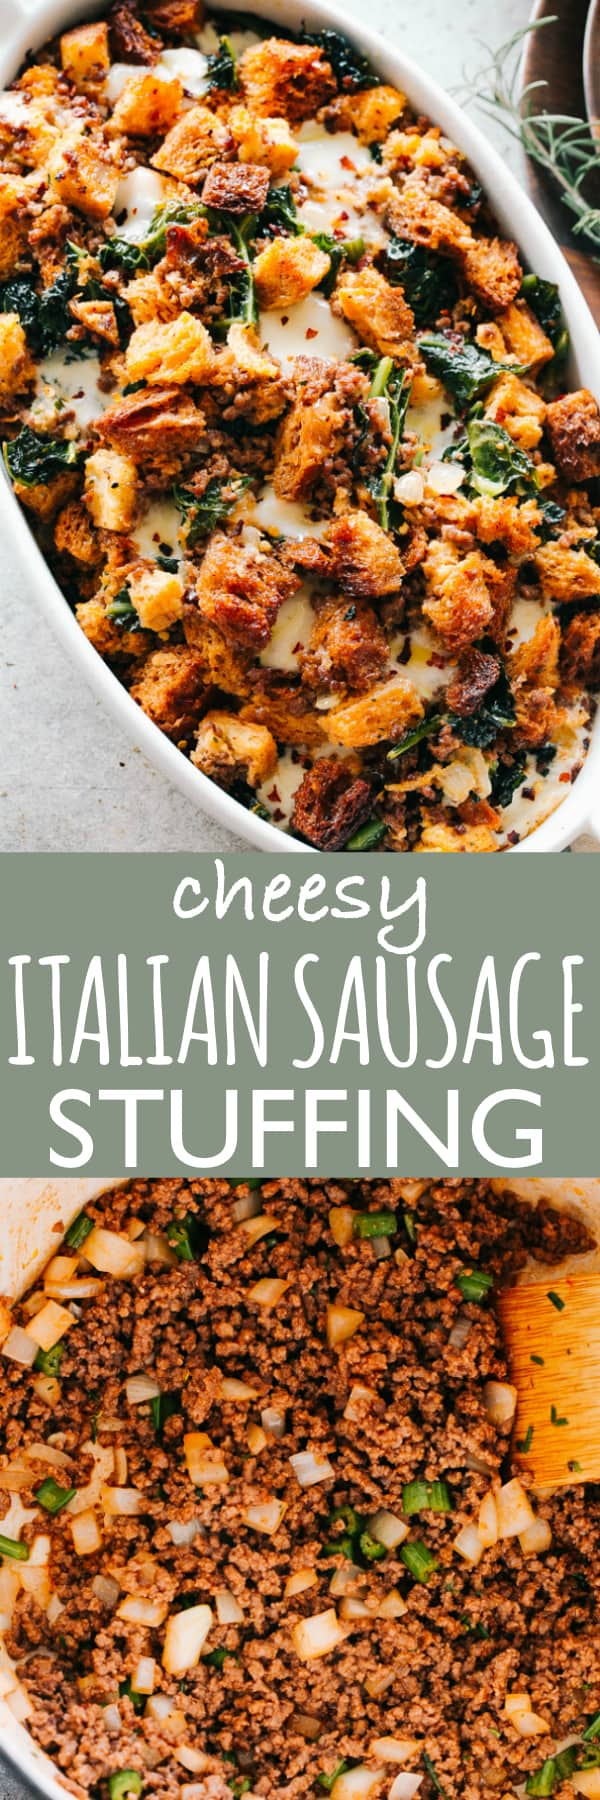 Cheesy Italian Sausage Stuffing Recipe | Delicious Thanksgiving Side Dish